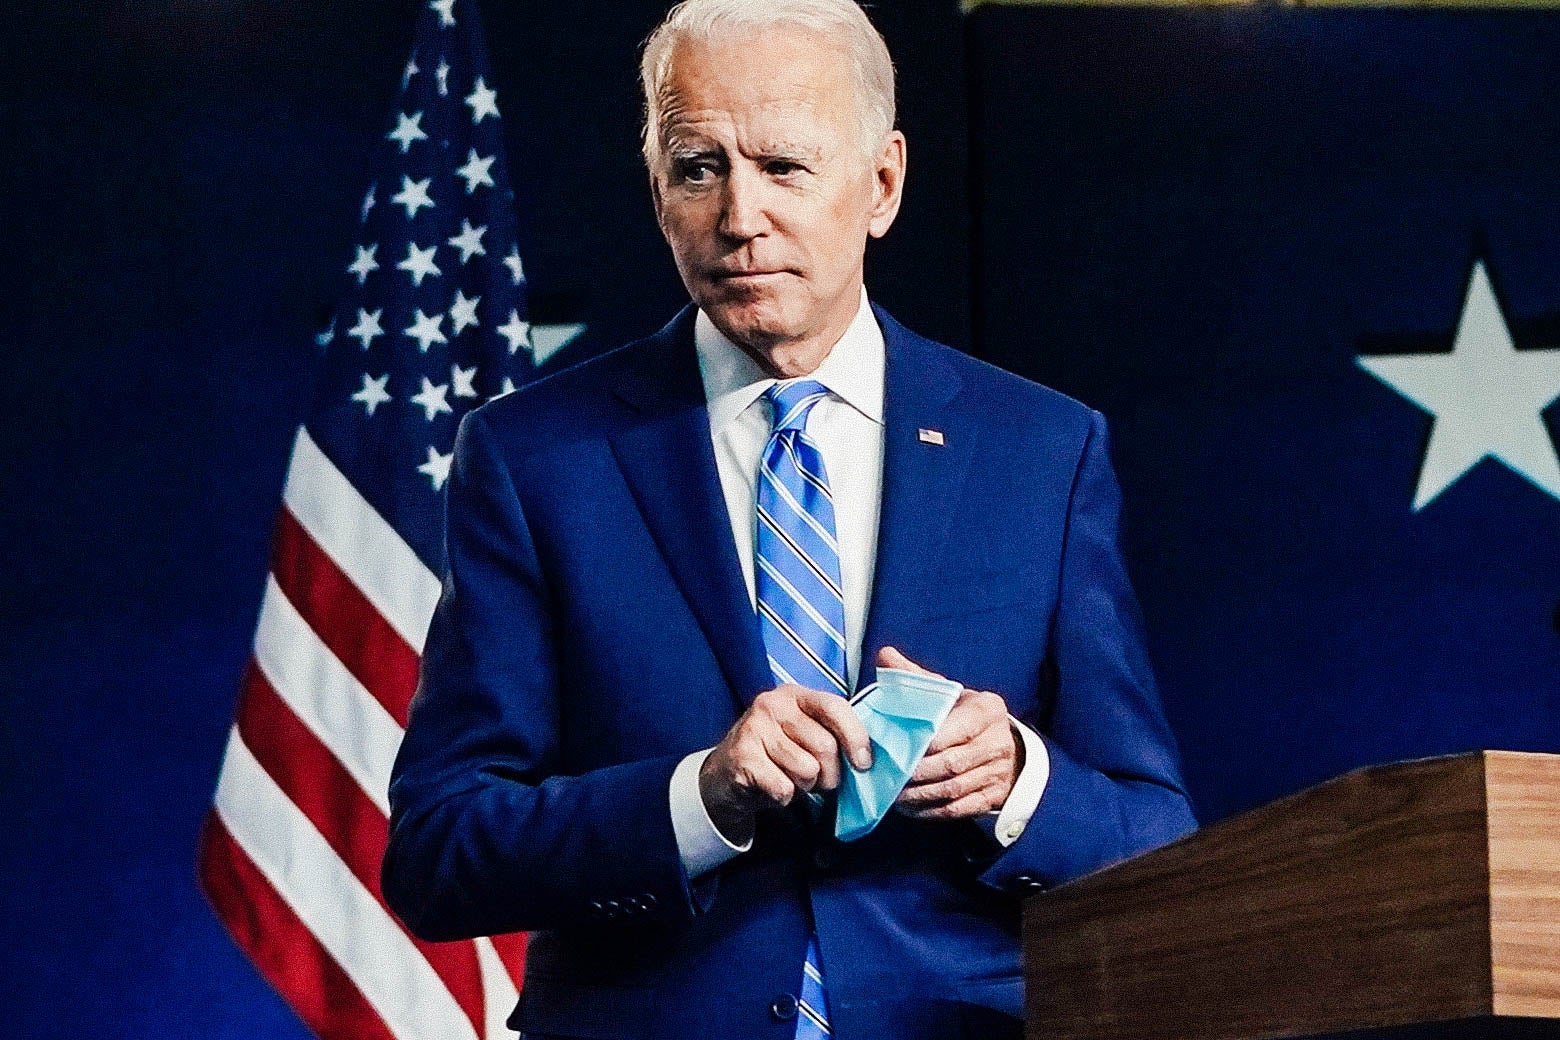 Biden, holding a surgical mask, walks away from a lectern, with an American flag in the background